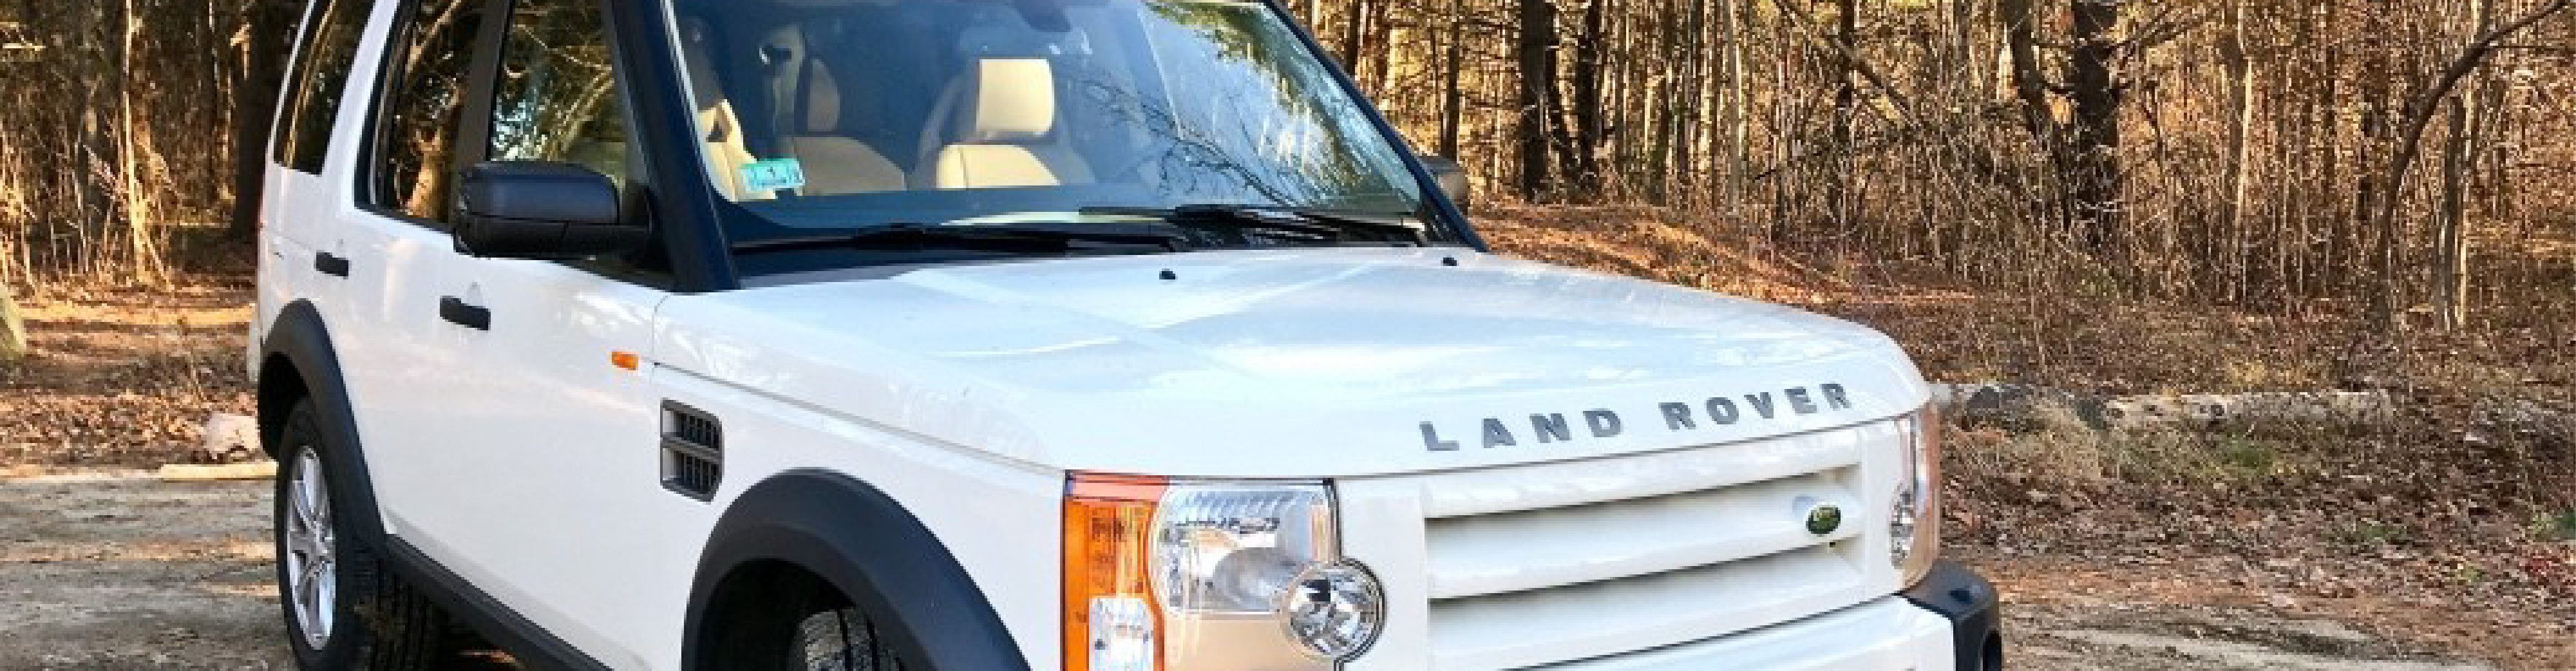 For trusted Land Rover Range Rover maintenance and repair - Car Kings in Wallington, NJ